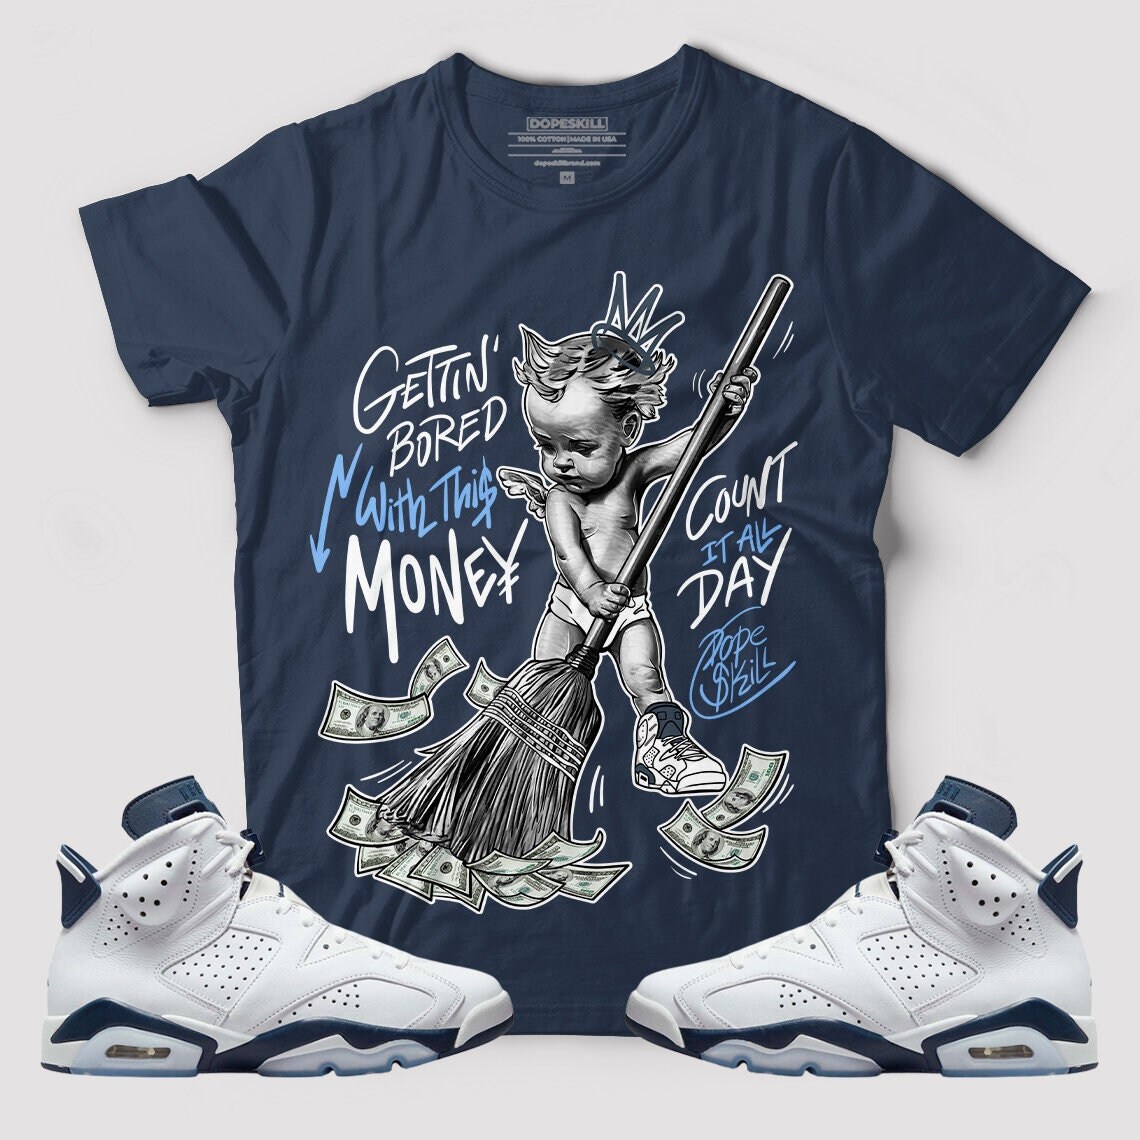 graphic tees to go with jordans